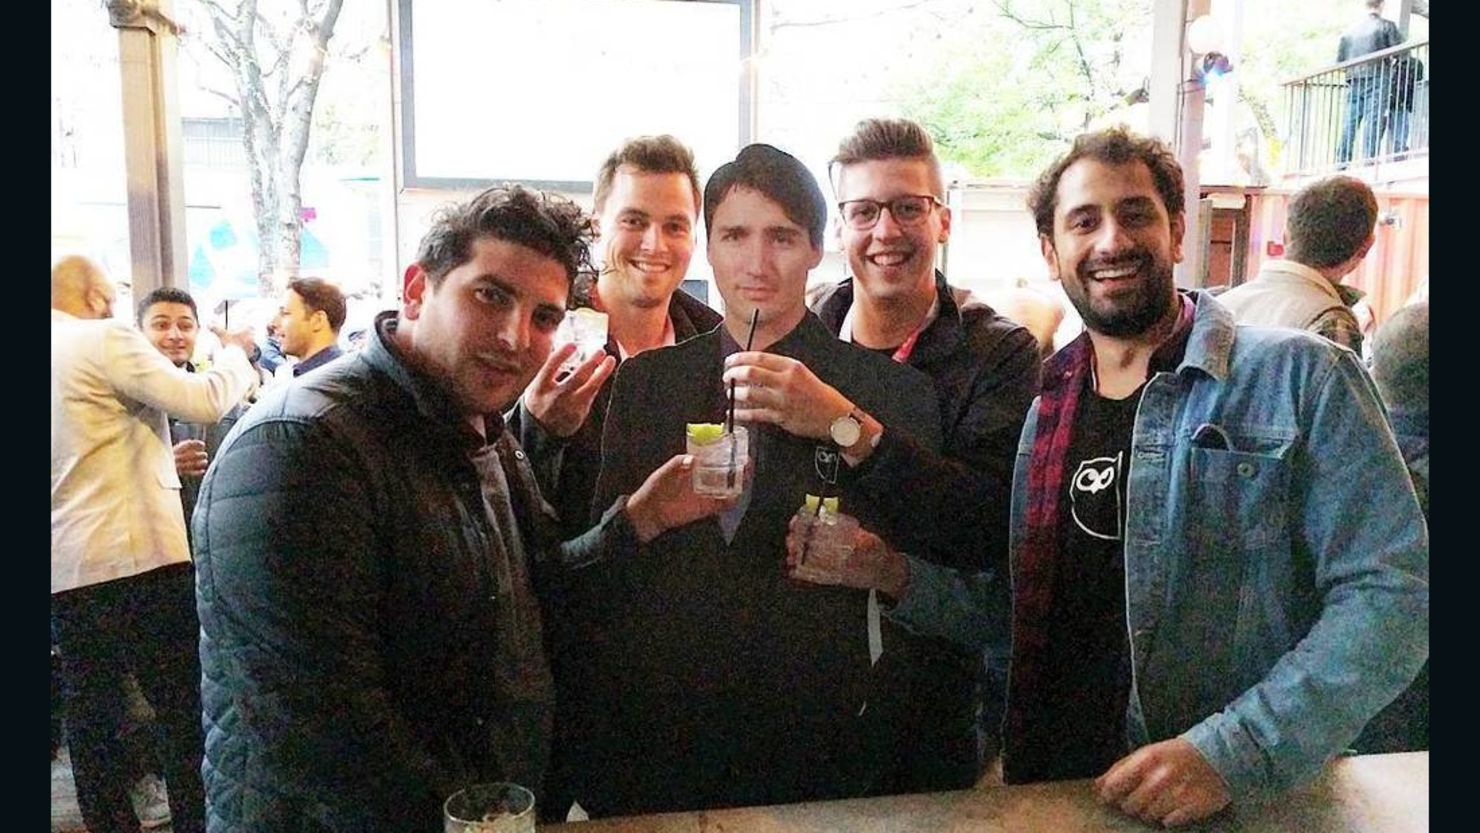 The cutout version of Canadian Prime Minister Justin Trudeau, center, cut it up with admirers last week at South By Southwest.